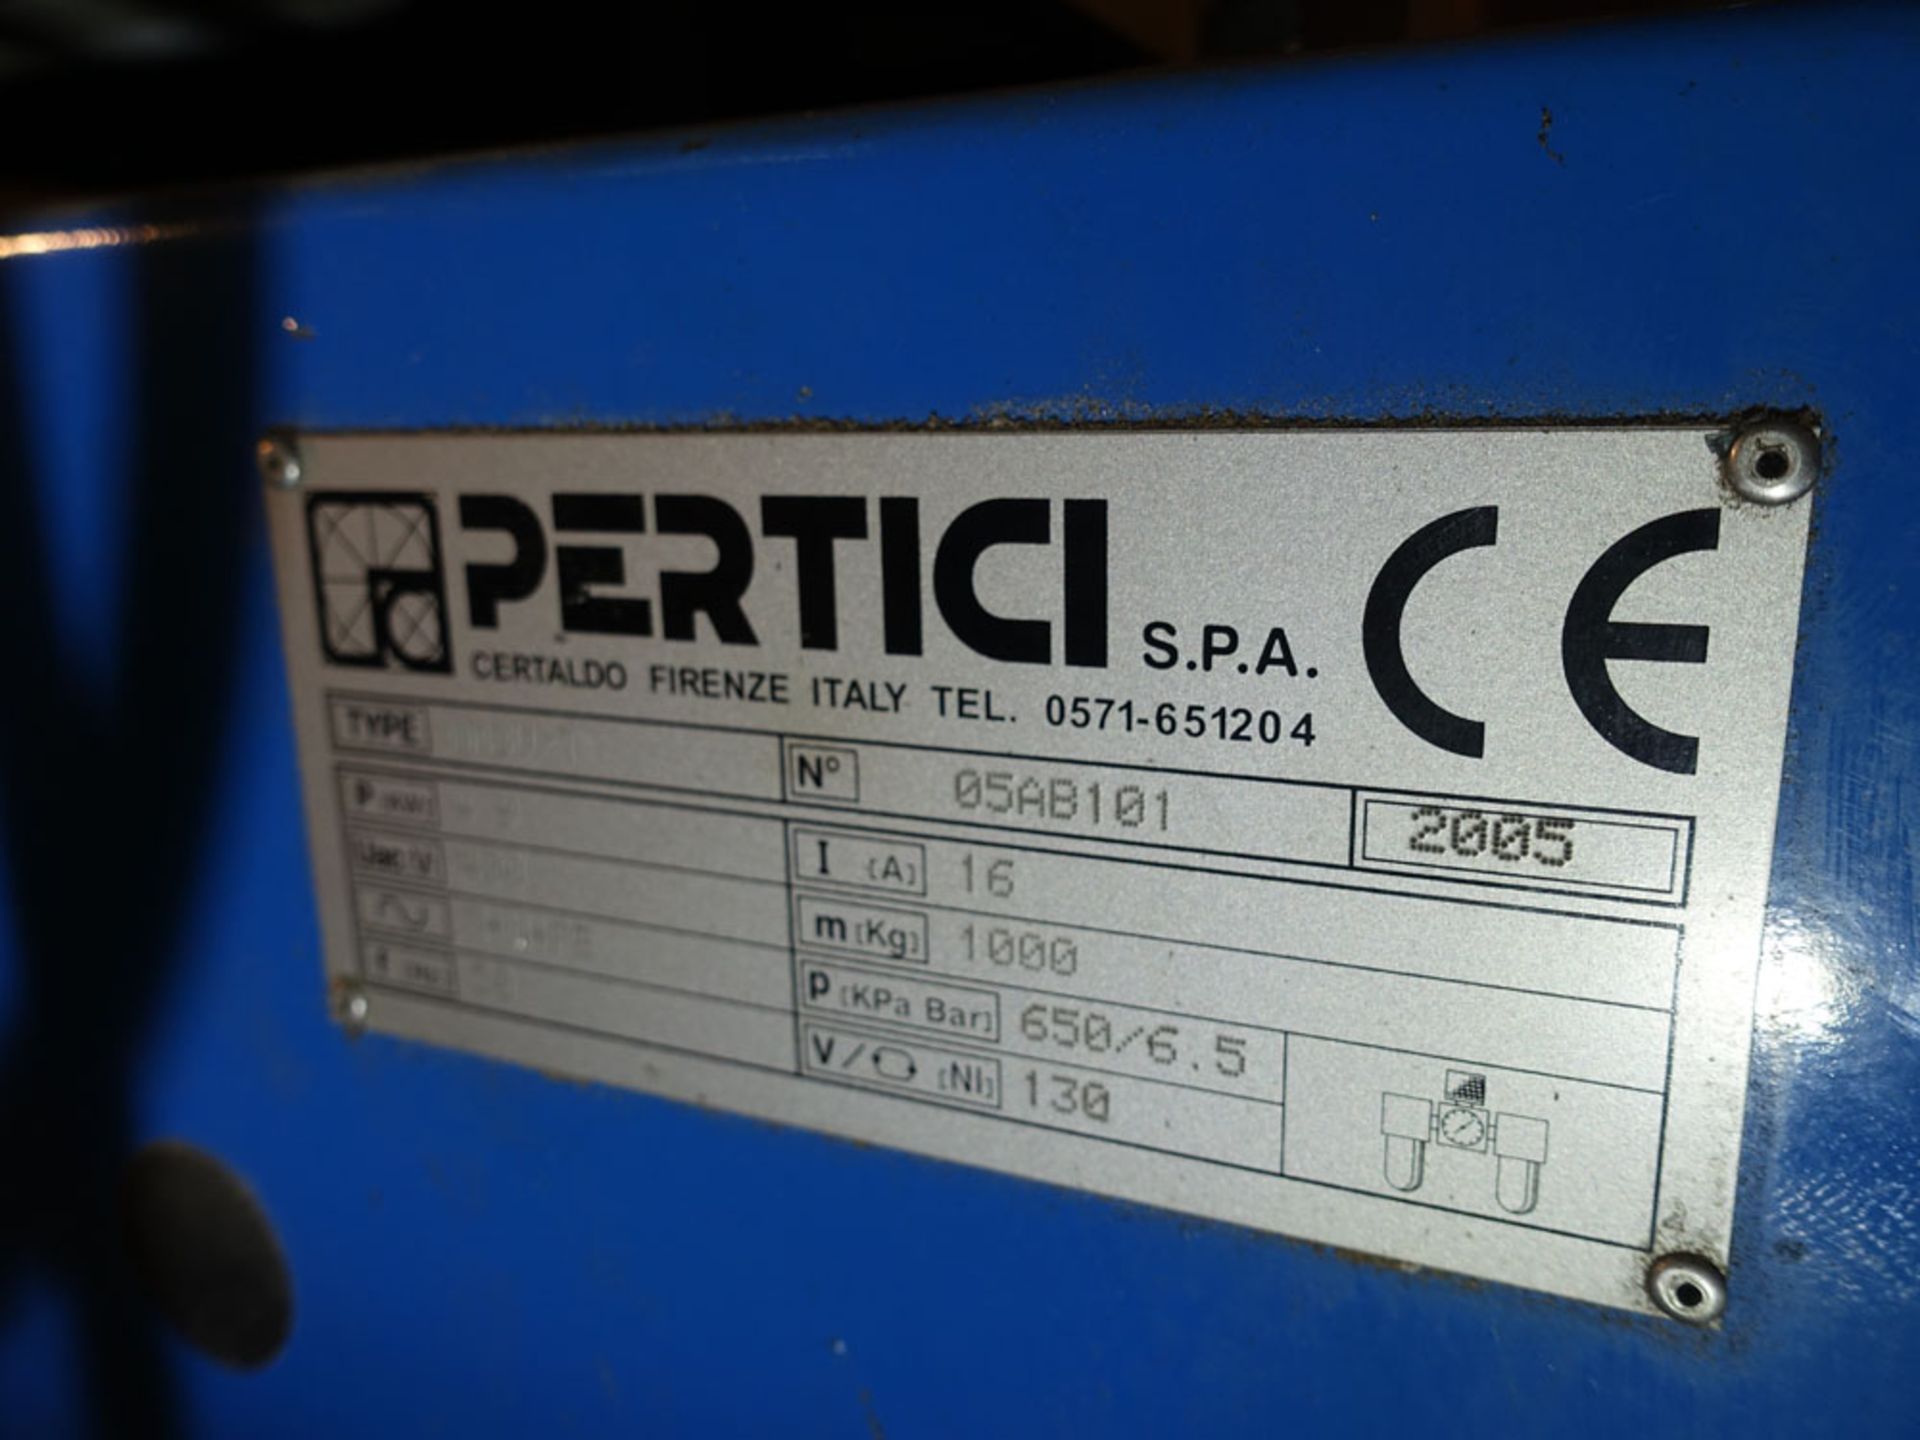 Pertici Univer model WM3V-T three head welder Serial number 05AB101 Year 2005 - Image 9 of 9